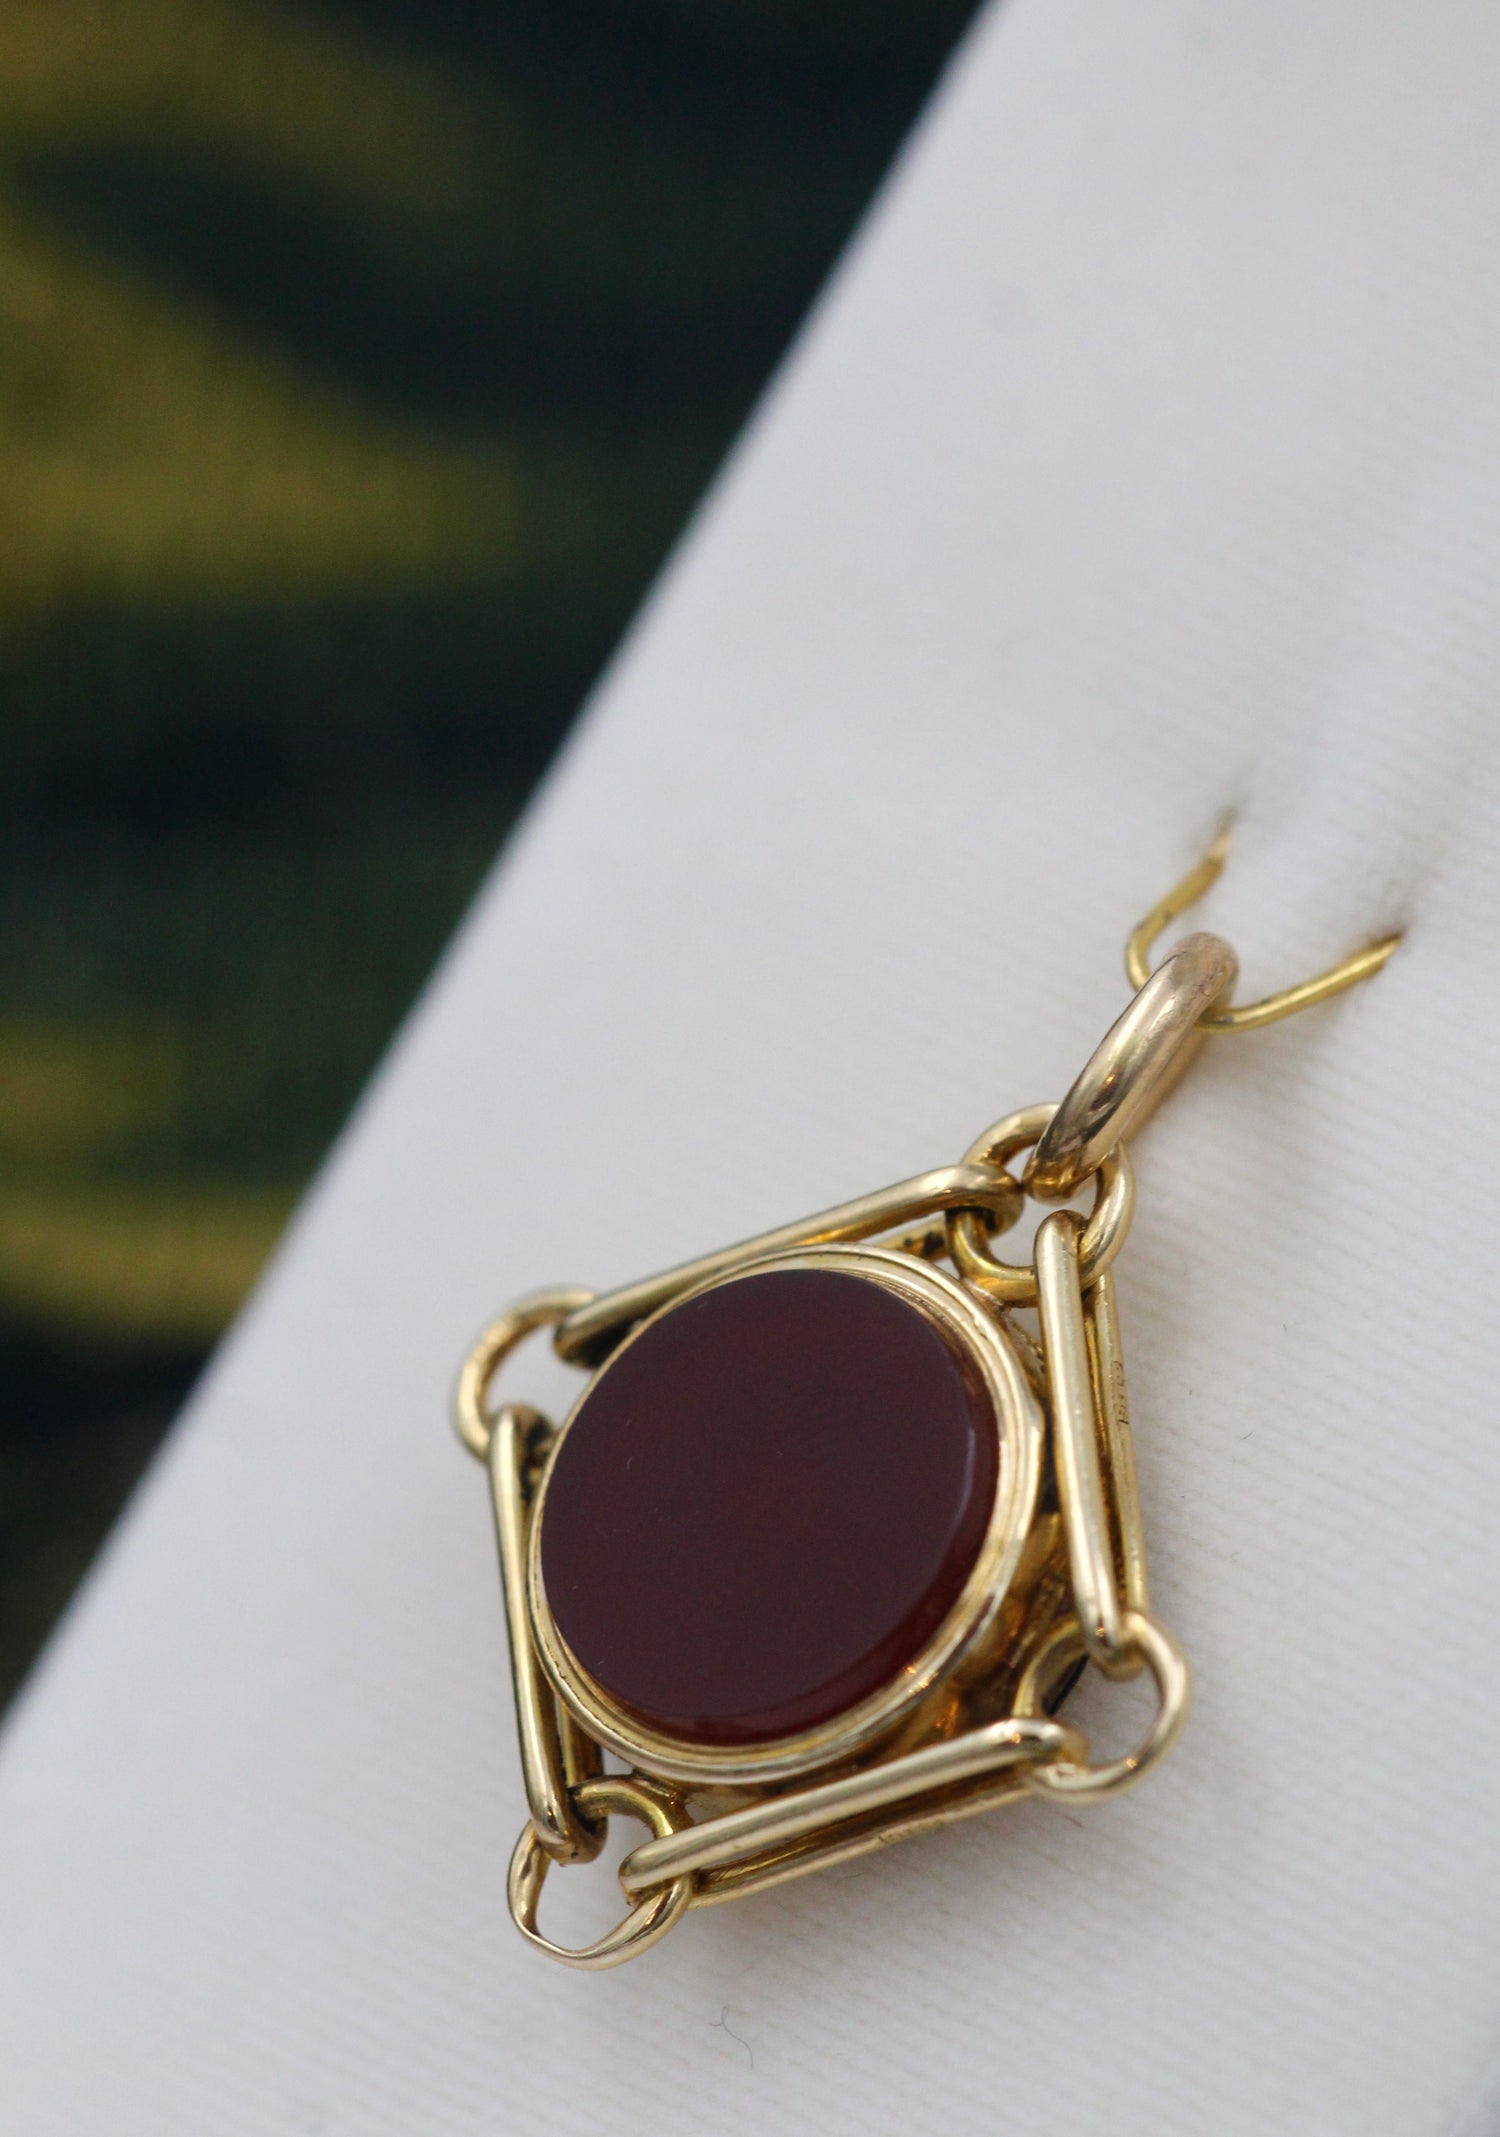 A very fine 18 carat Yellow Gold Fob with a Compass and Carnelian Hard stone. London Circa 1908 - Robin Haydock Antiques